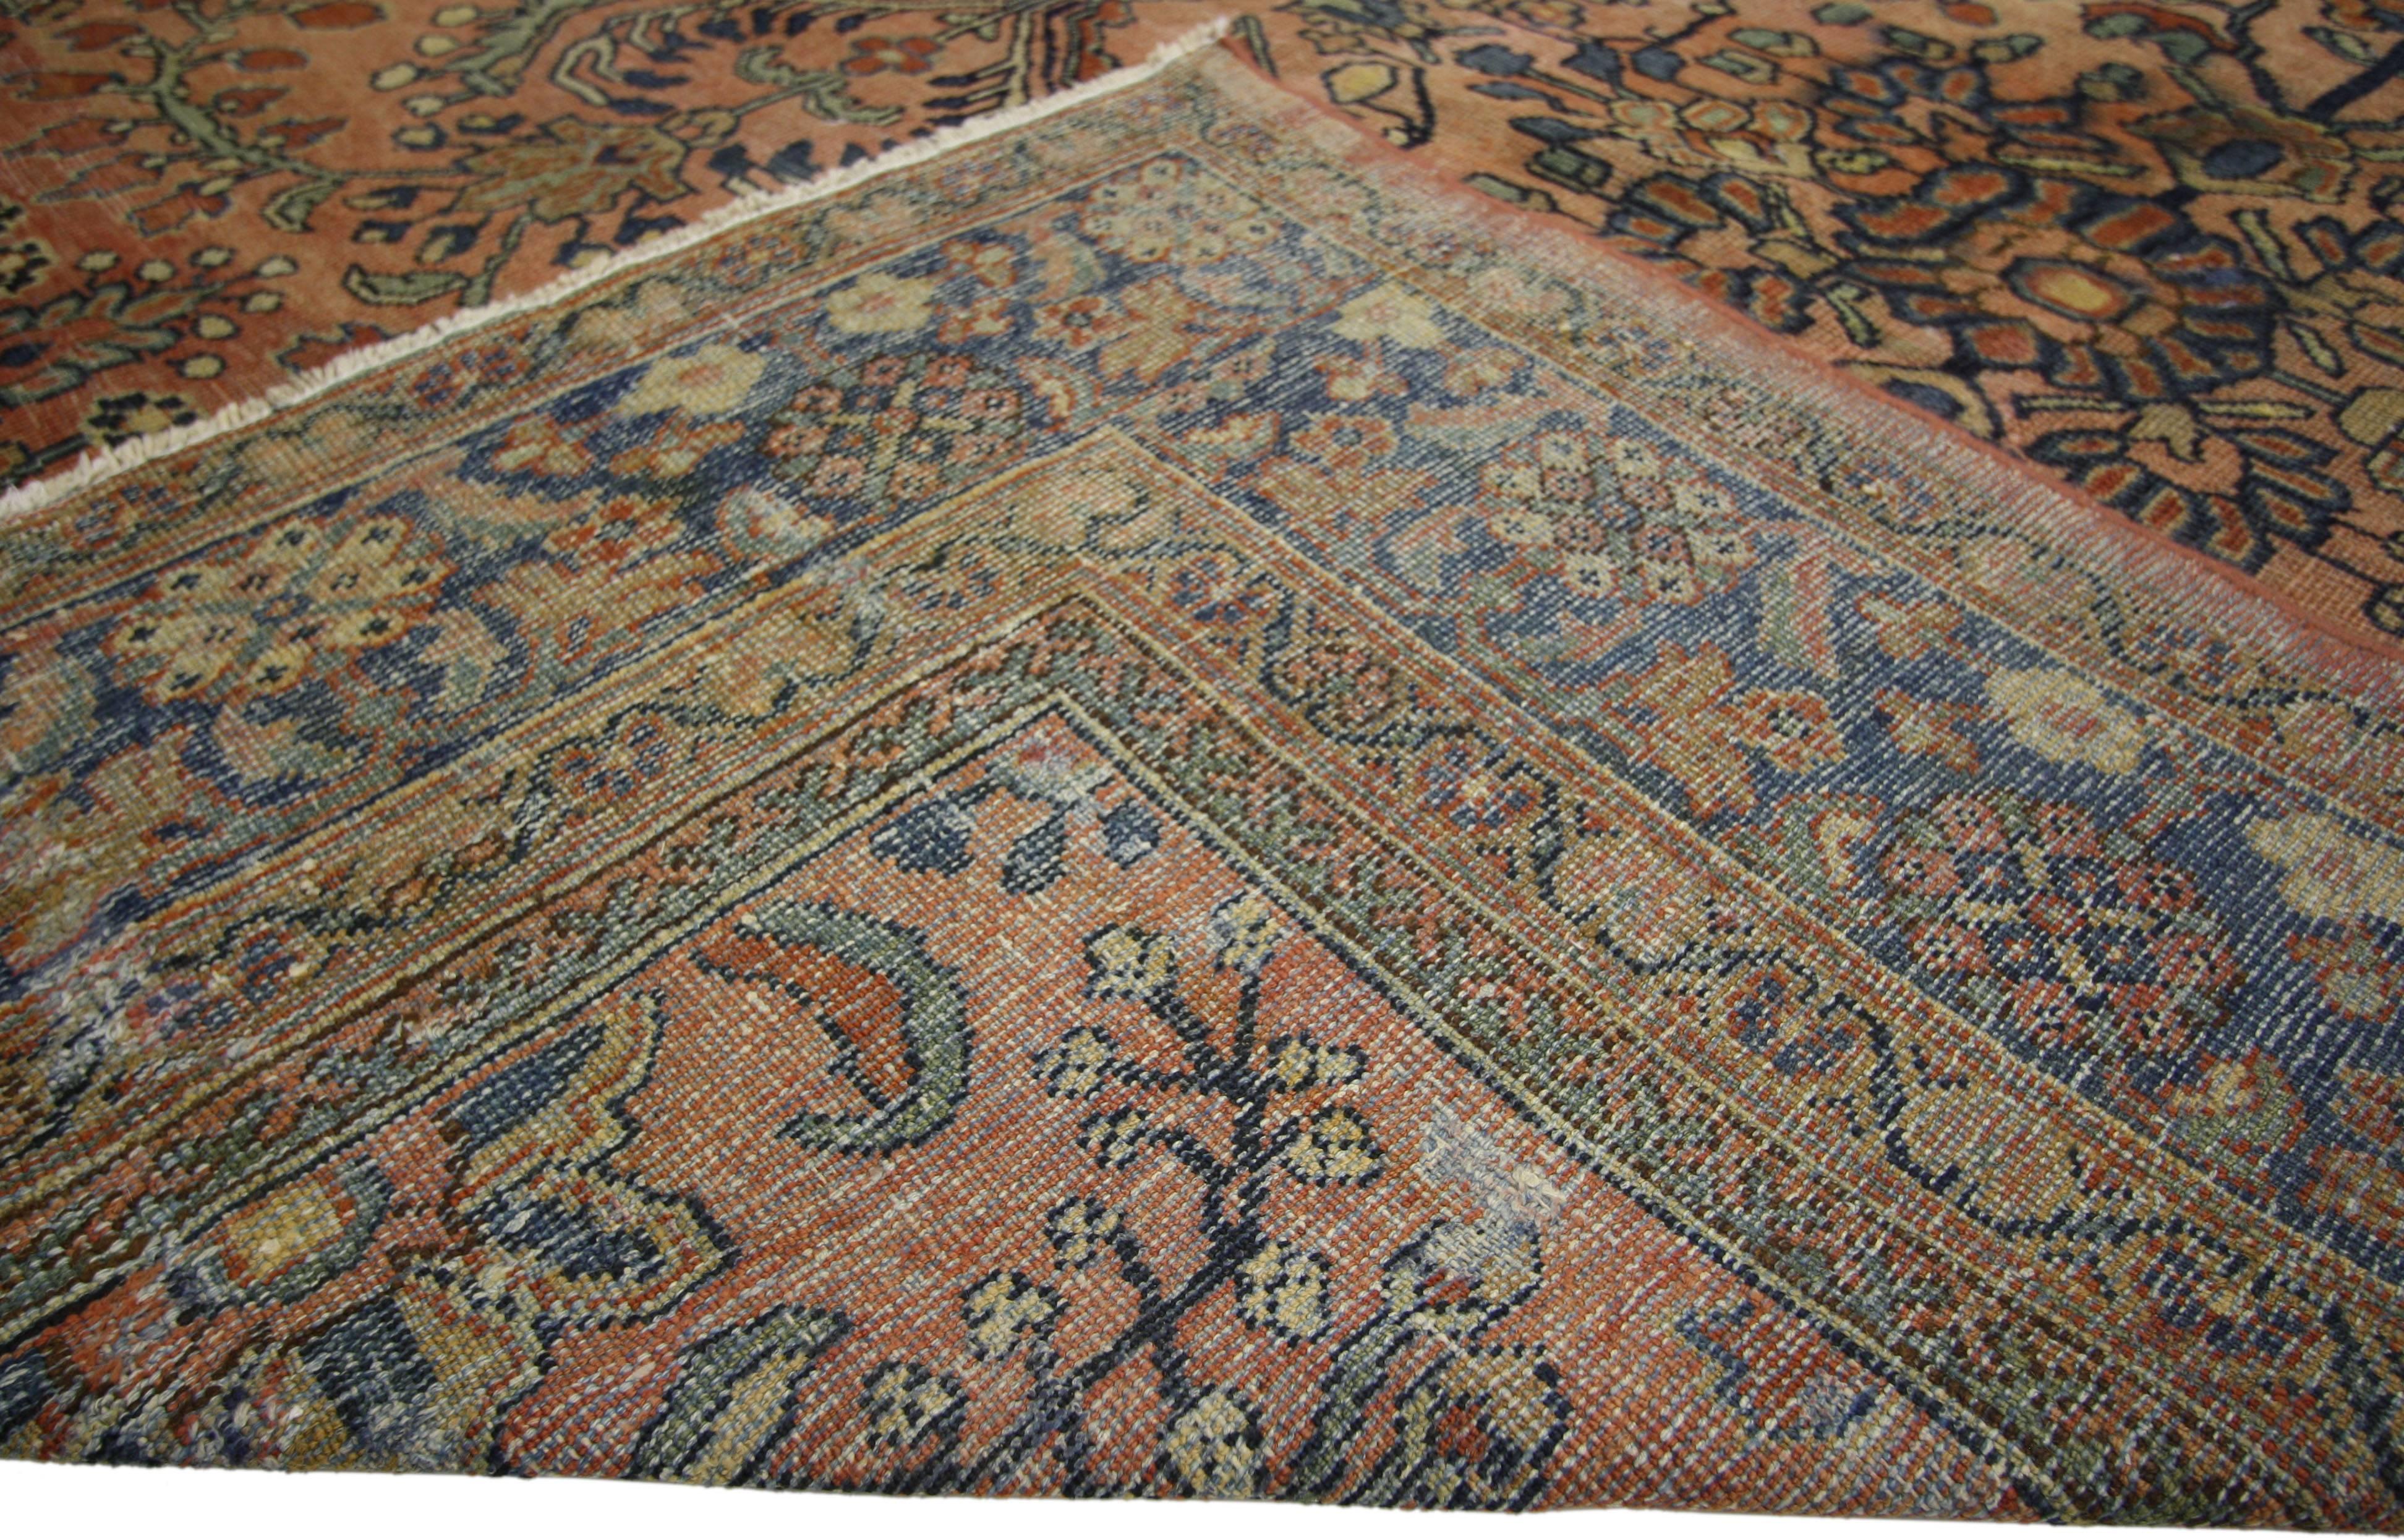 Hand-Knotted Antique Persian Lilihan Rug with Rustic Victorian Style